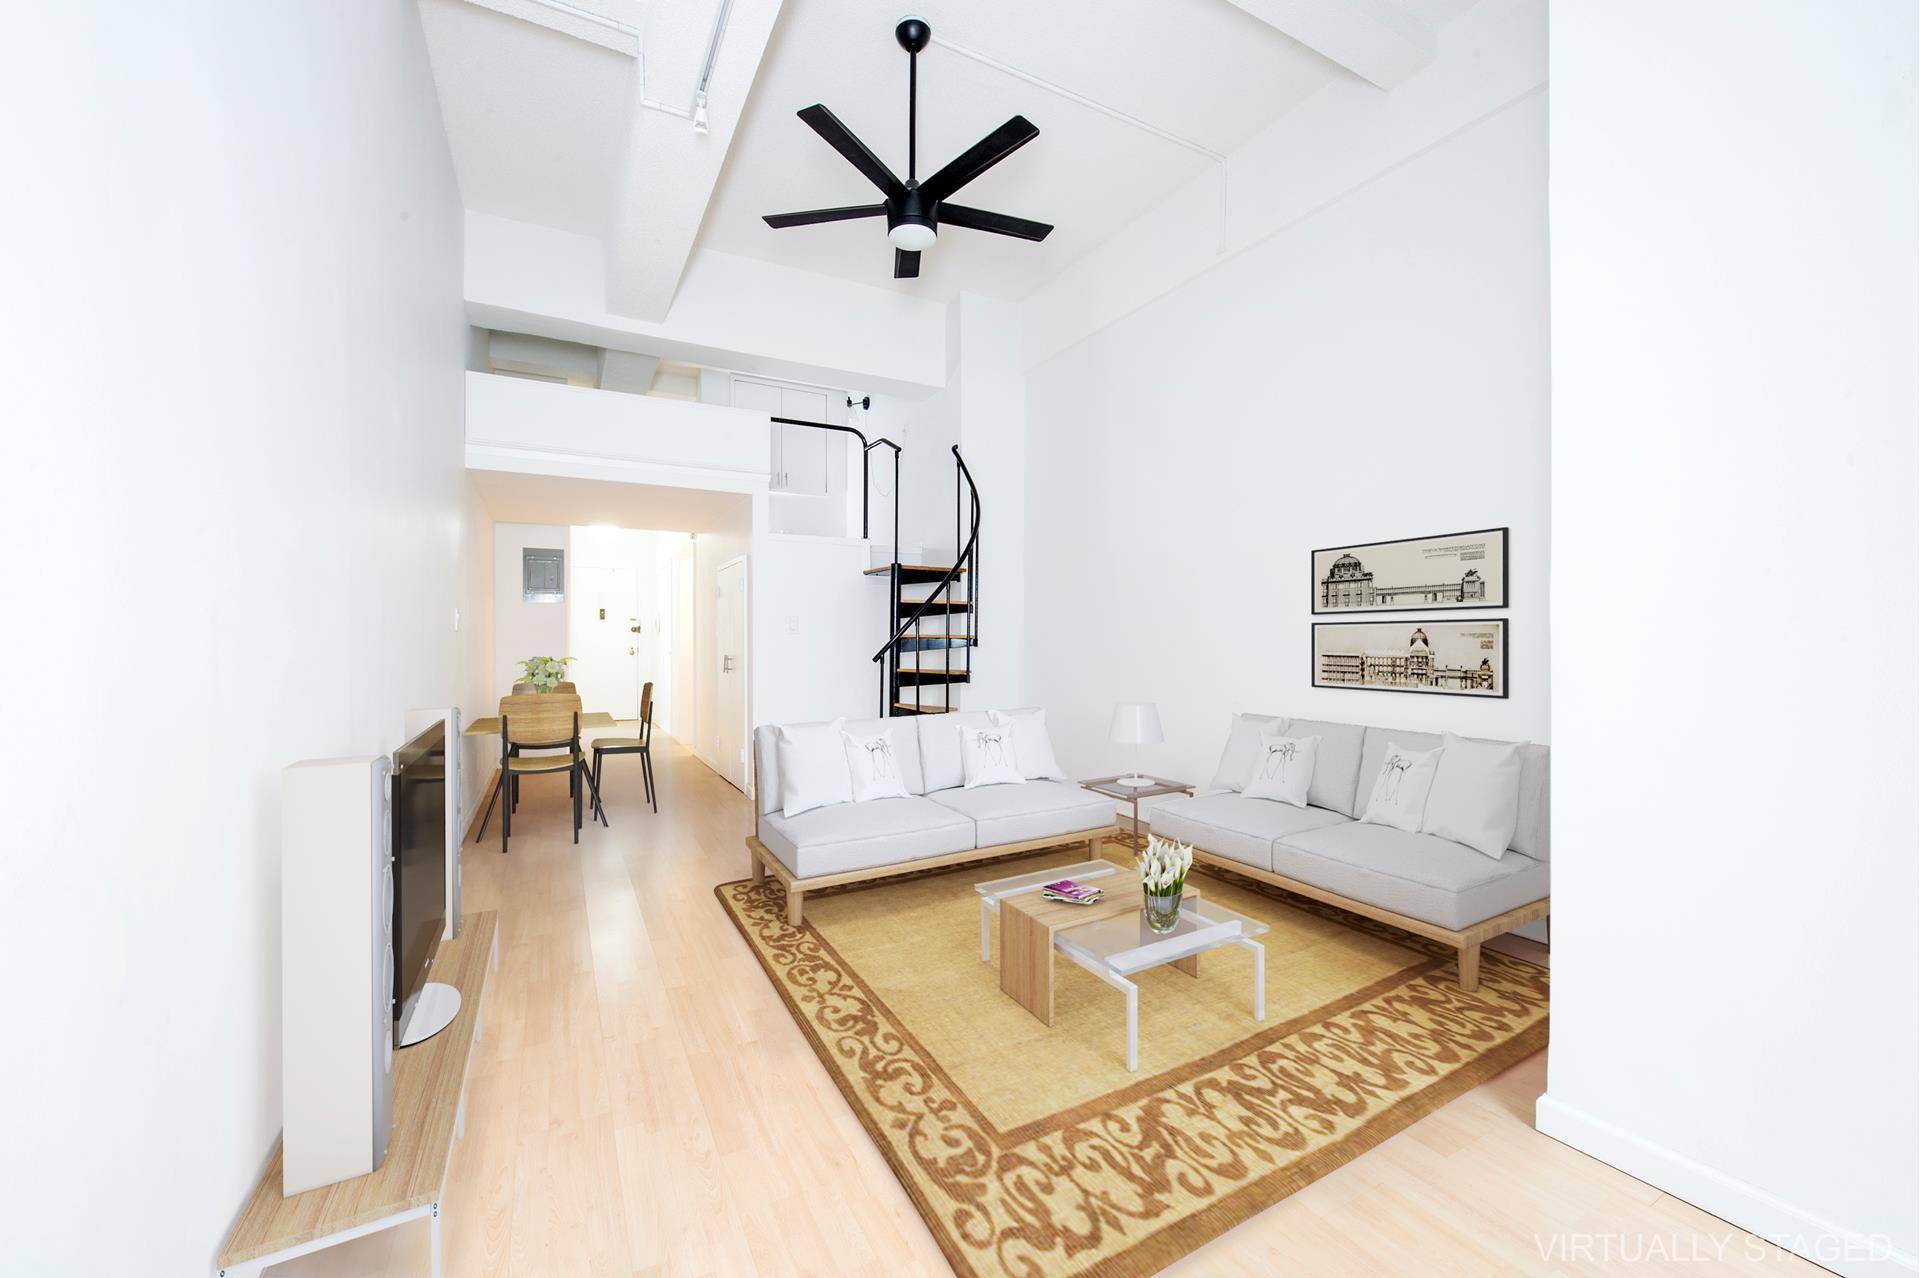 Gorgeous lofted, studio apartment, gut renovated with 12 foot ceilings, creating a quintessential New York City property.